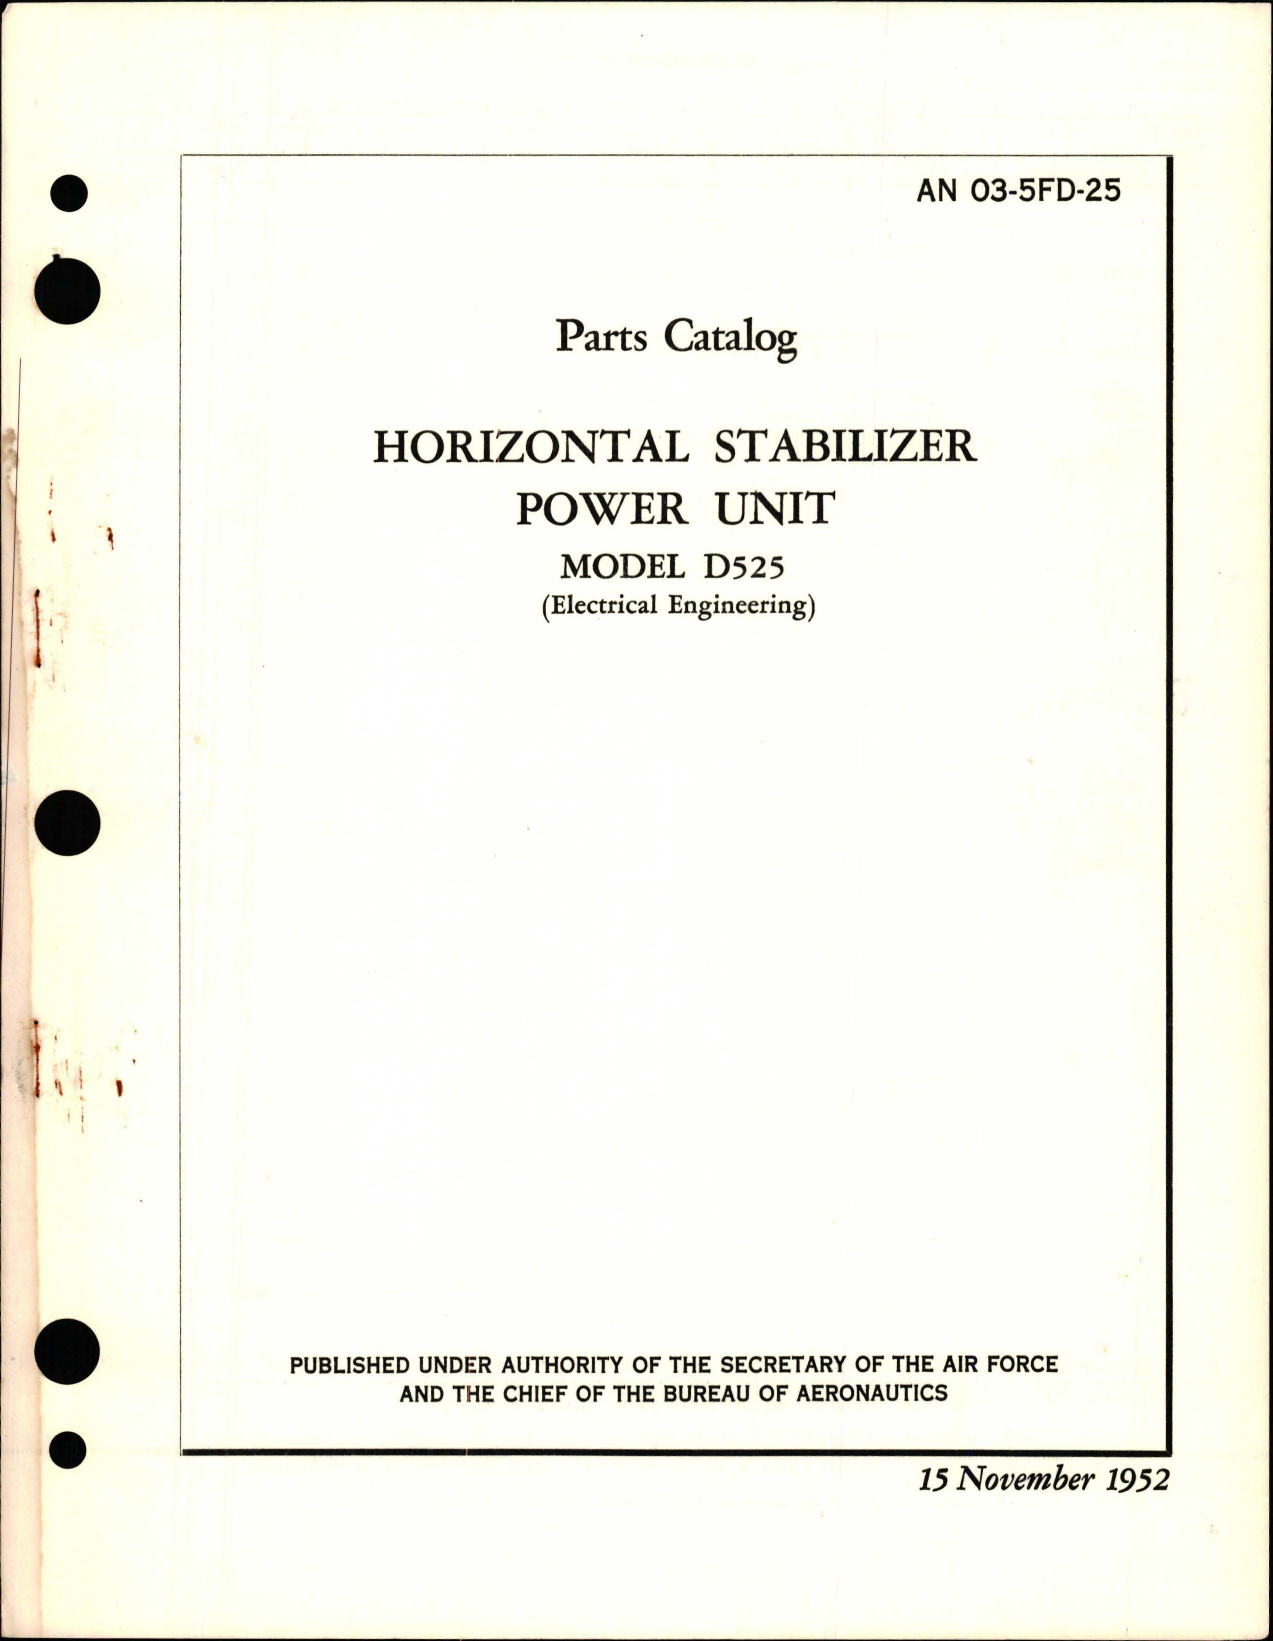 Sample page 1 from AirCorps Library document: Parts Catalog for Horizontal Stabilizer Power Unit - Model D525 